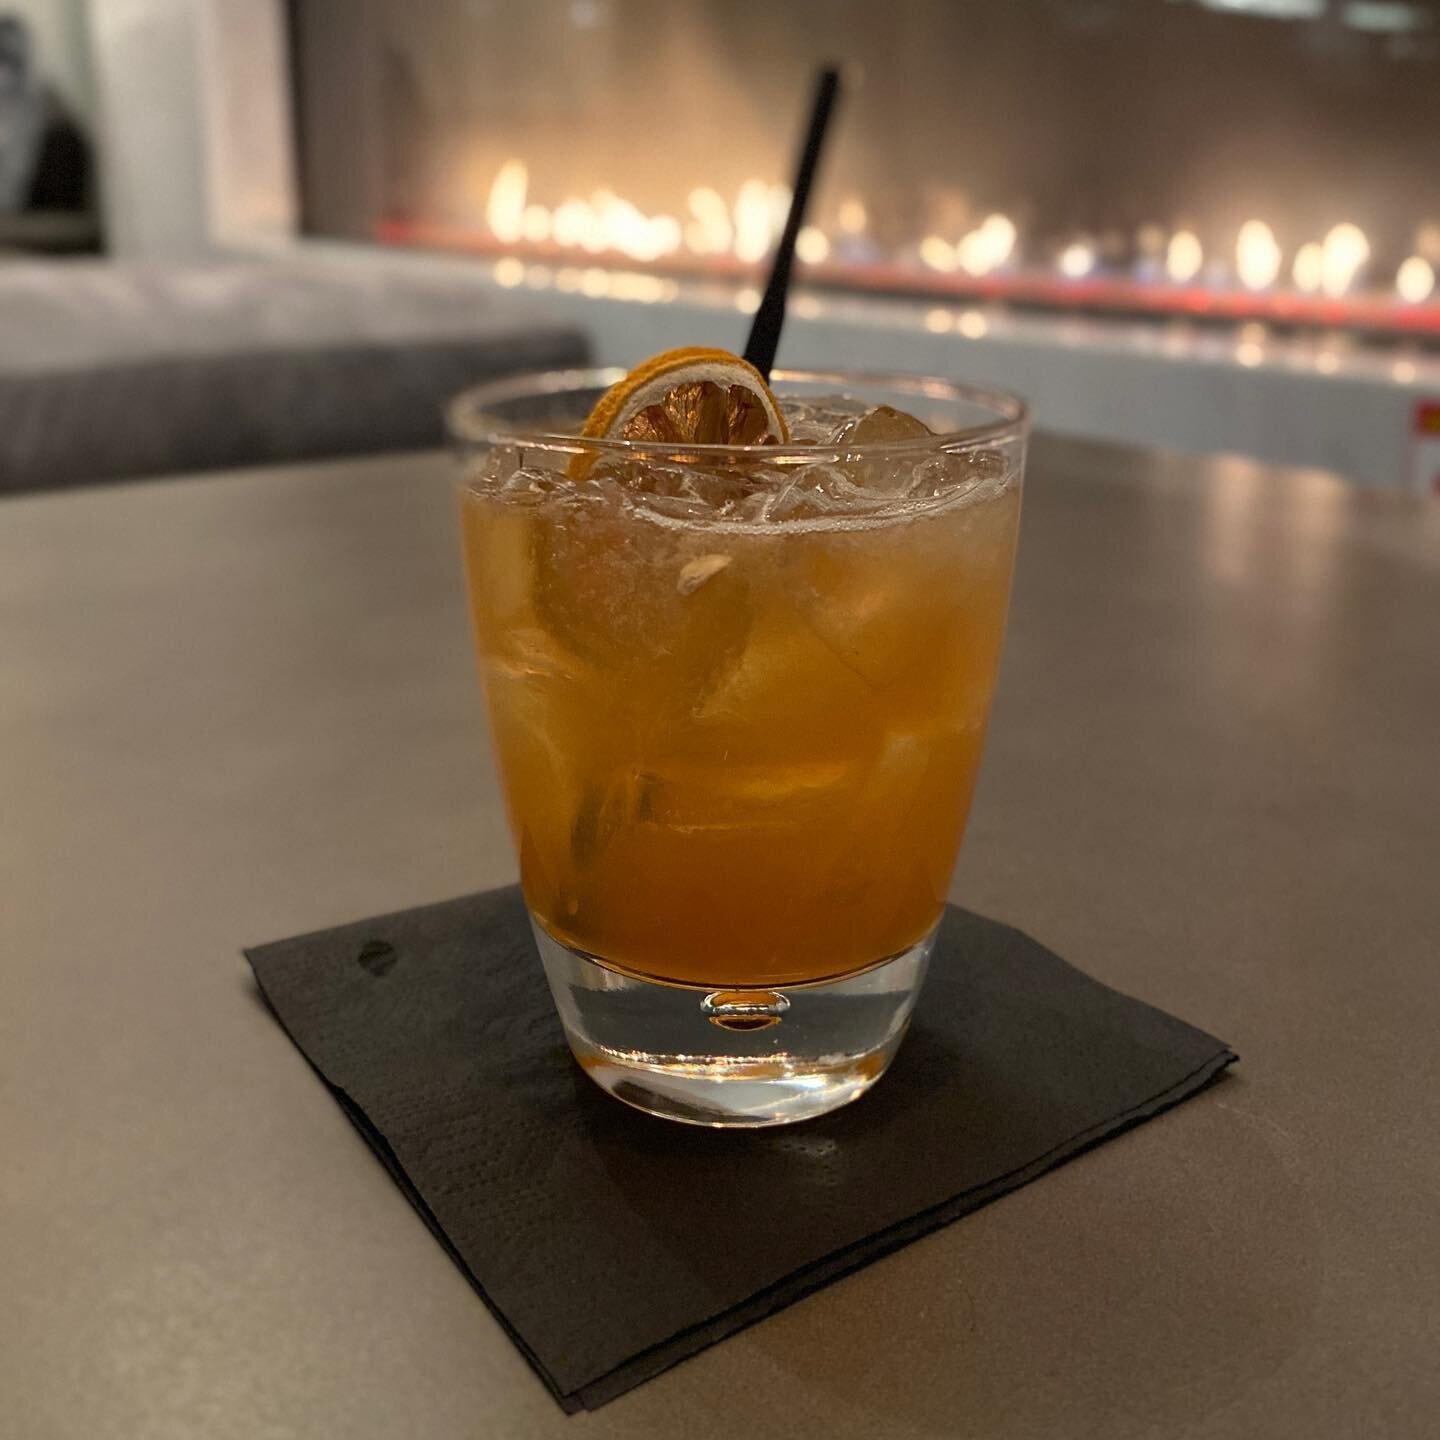 As this doc series is coming to a close, I&rsquo;d like to introduce The Double Entendre, and its creator @nathangdogg1969 - Nate worked the bar at a hotel we frequented in San Fran and he concocted this tasty beverage with an Amaro Montenegro base. 